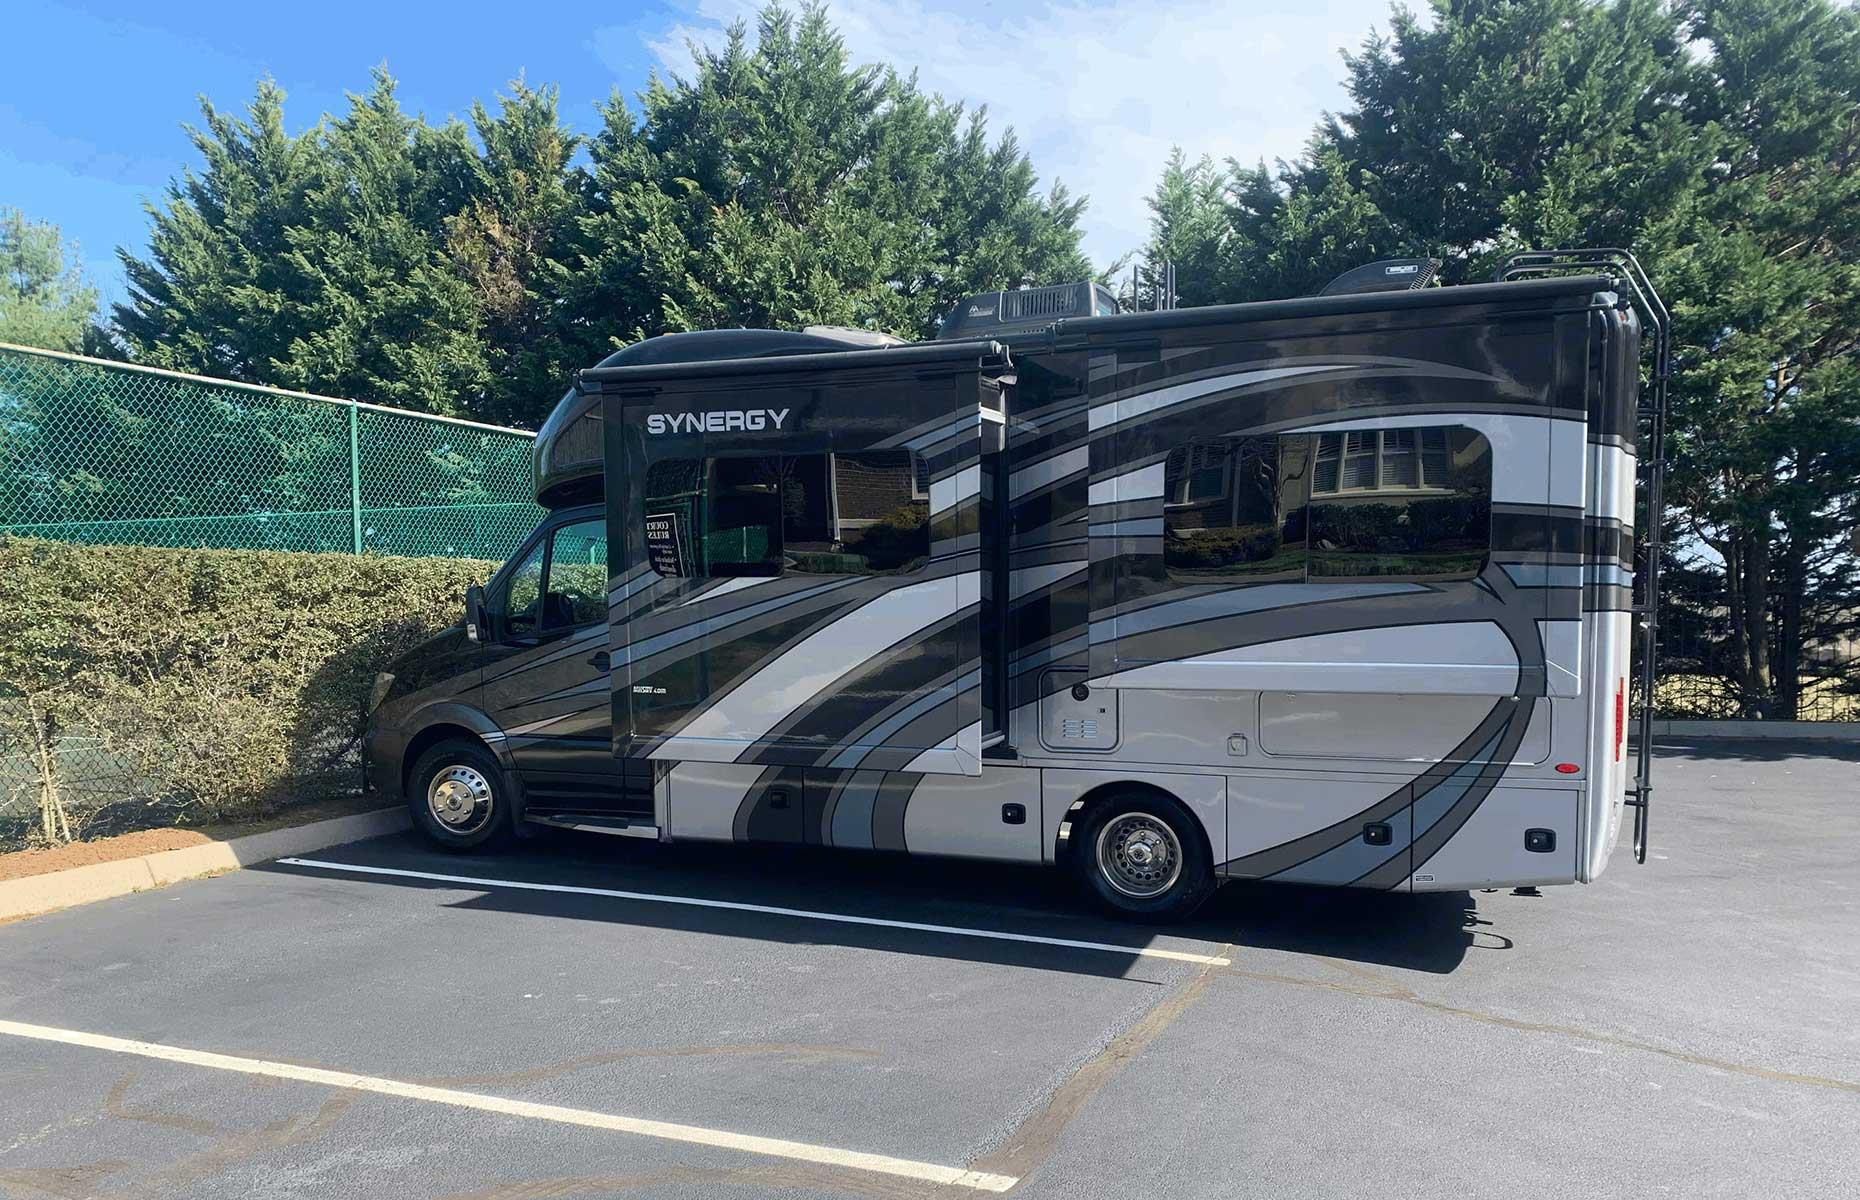 At 24 feet (7m) long, the 2018 Thor Synergy is an easy ride for first-time drivers. This Class C motorhome sleeps up to four passengers and is perfect for a longer weekend getaway, with outdoor amenities allowing you to make the most of your surroundings.